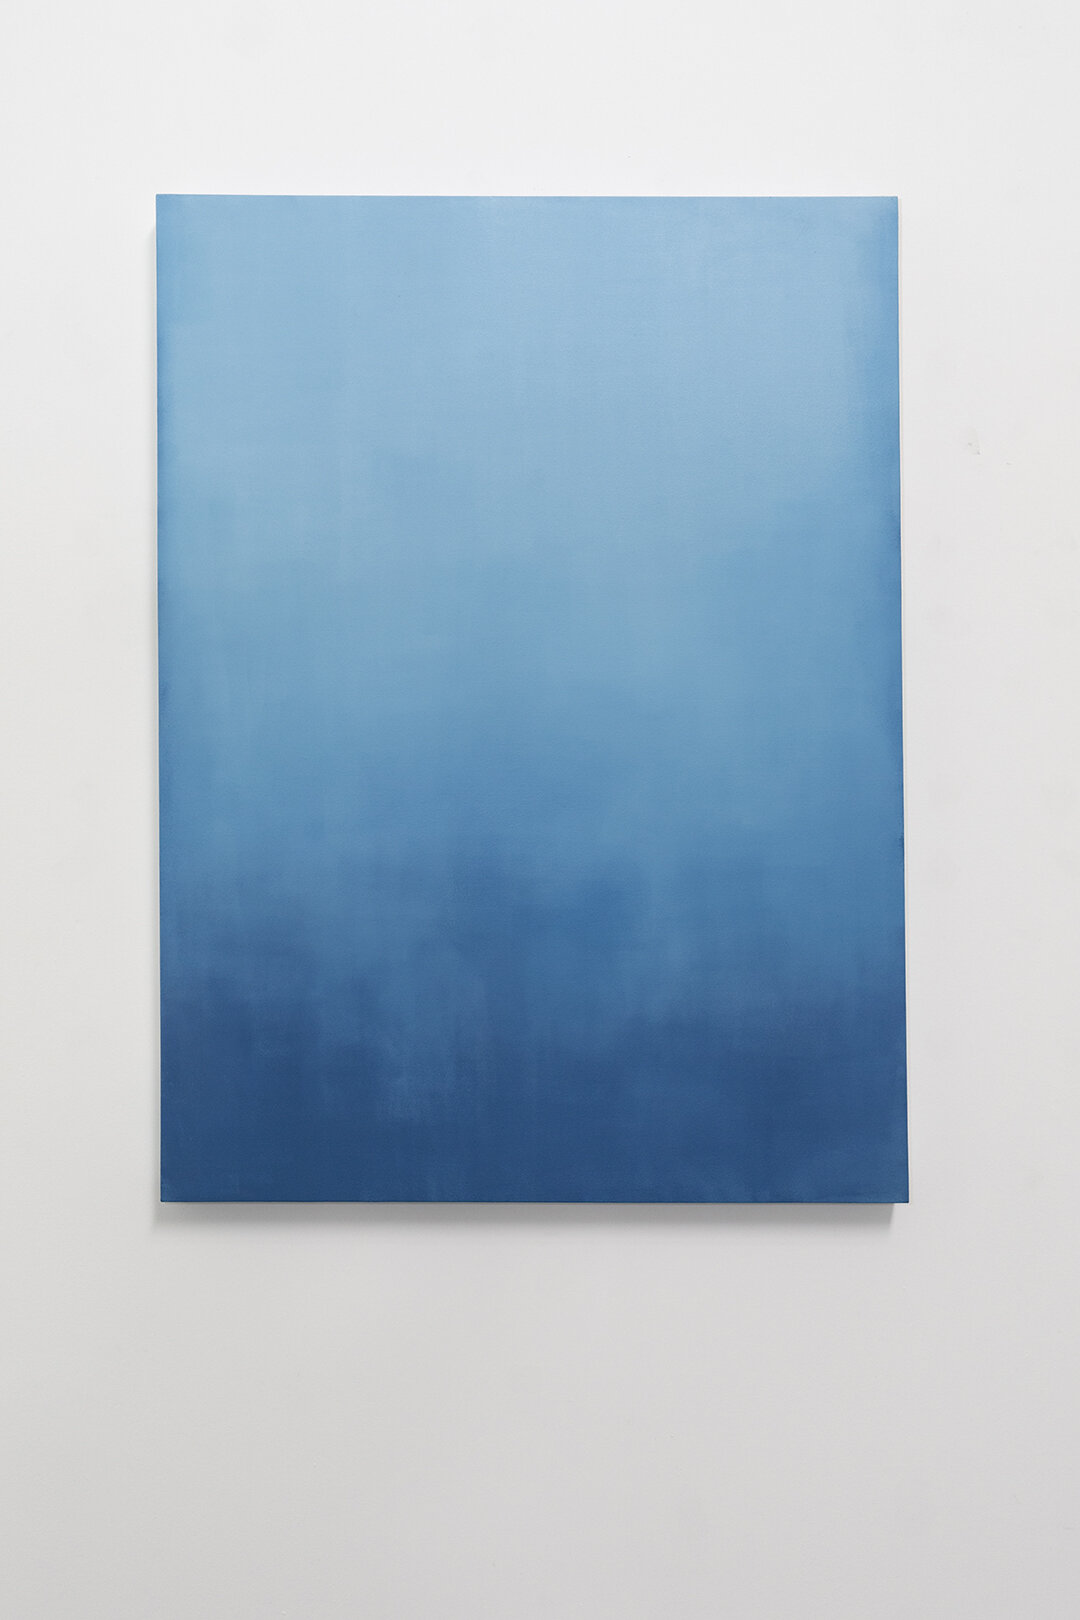 Clear Day, 2020, Oil on Linen, 48 x 36 inches